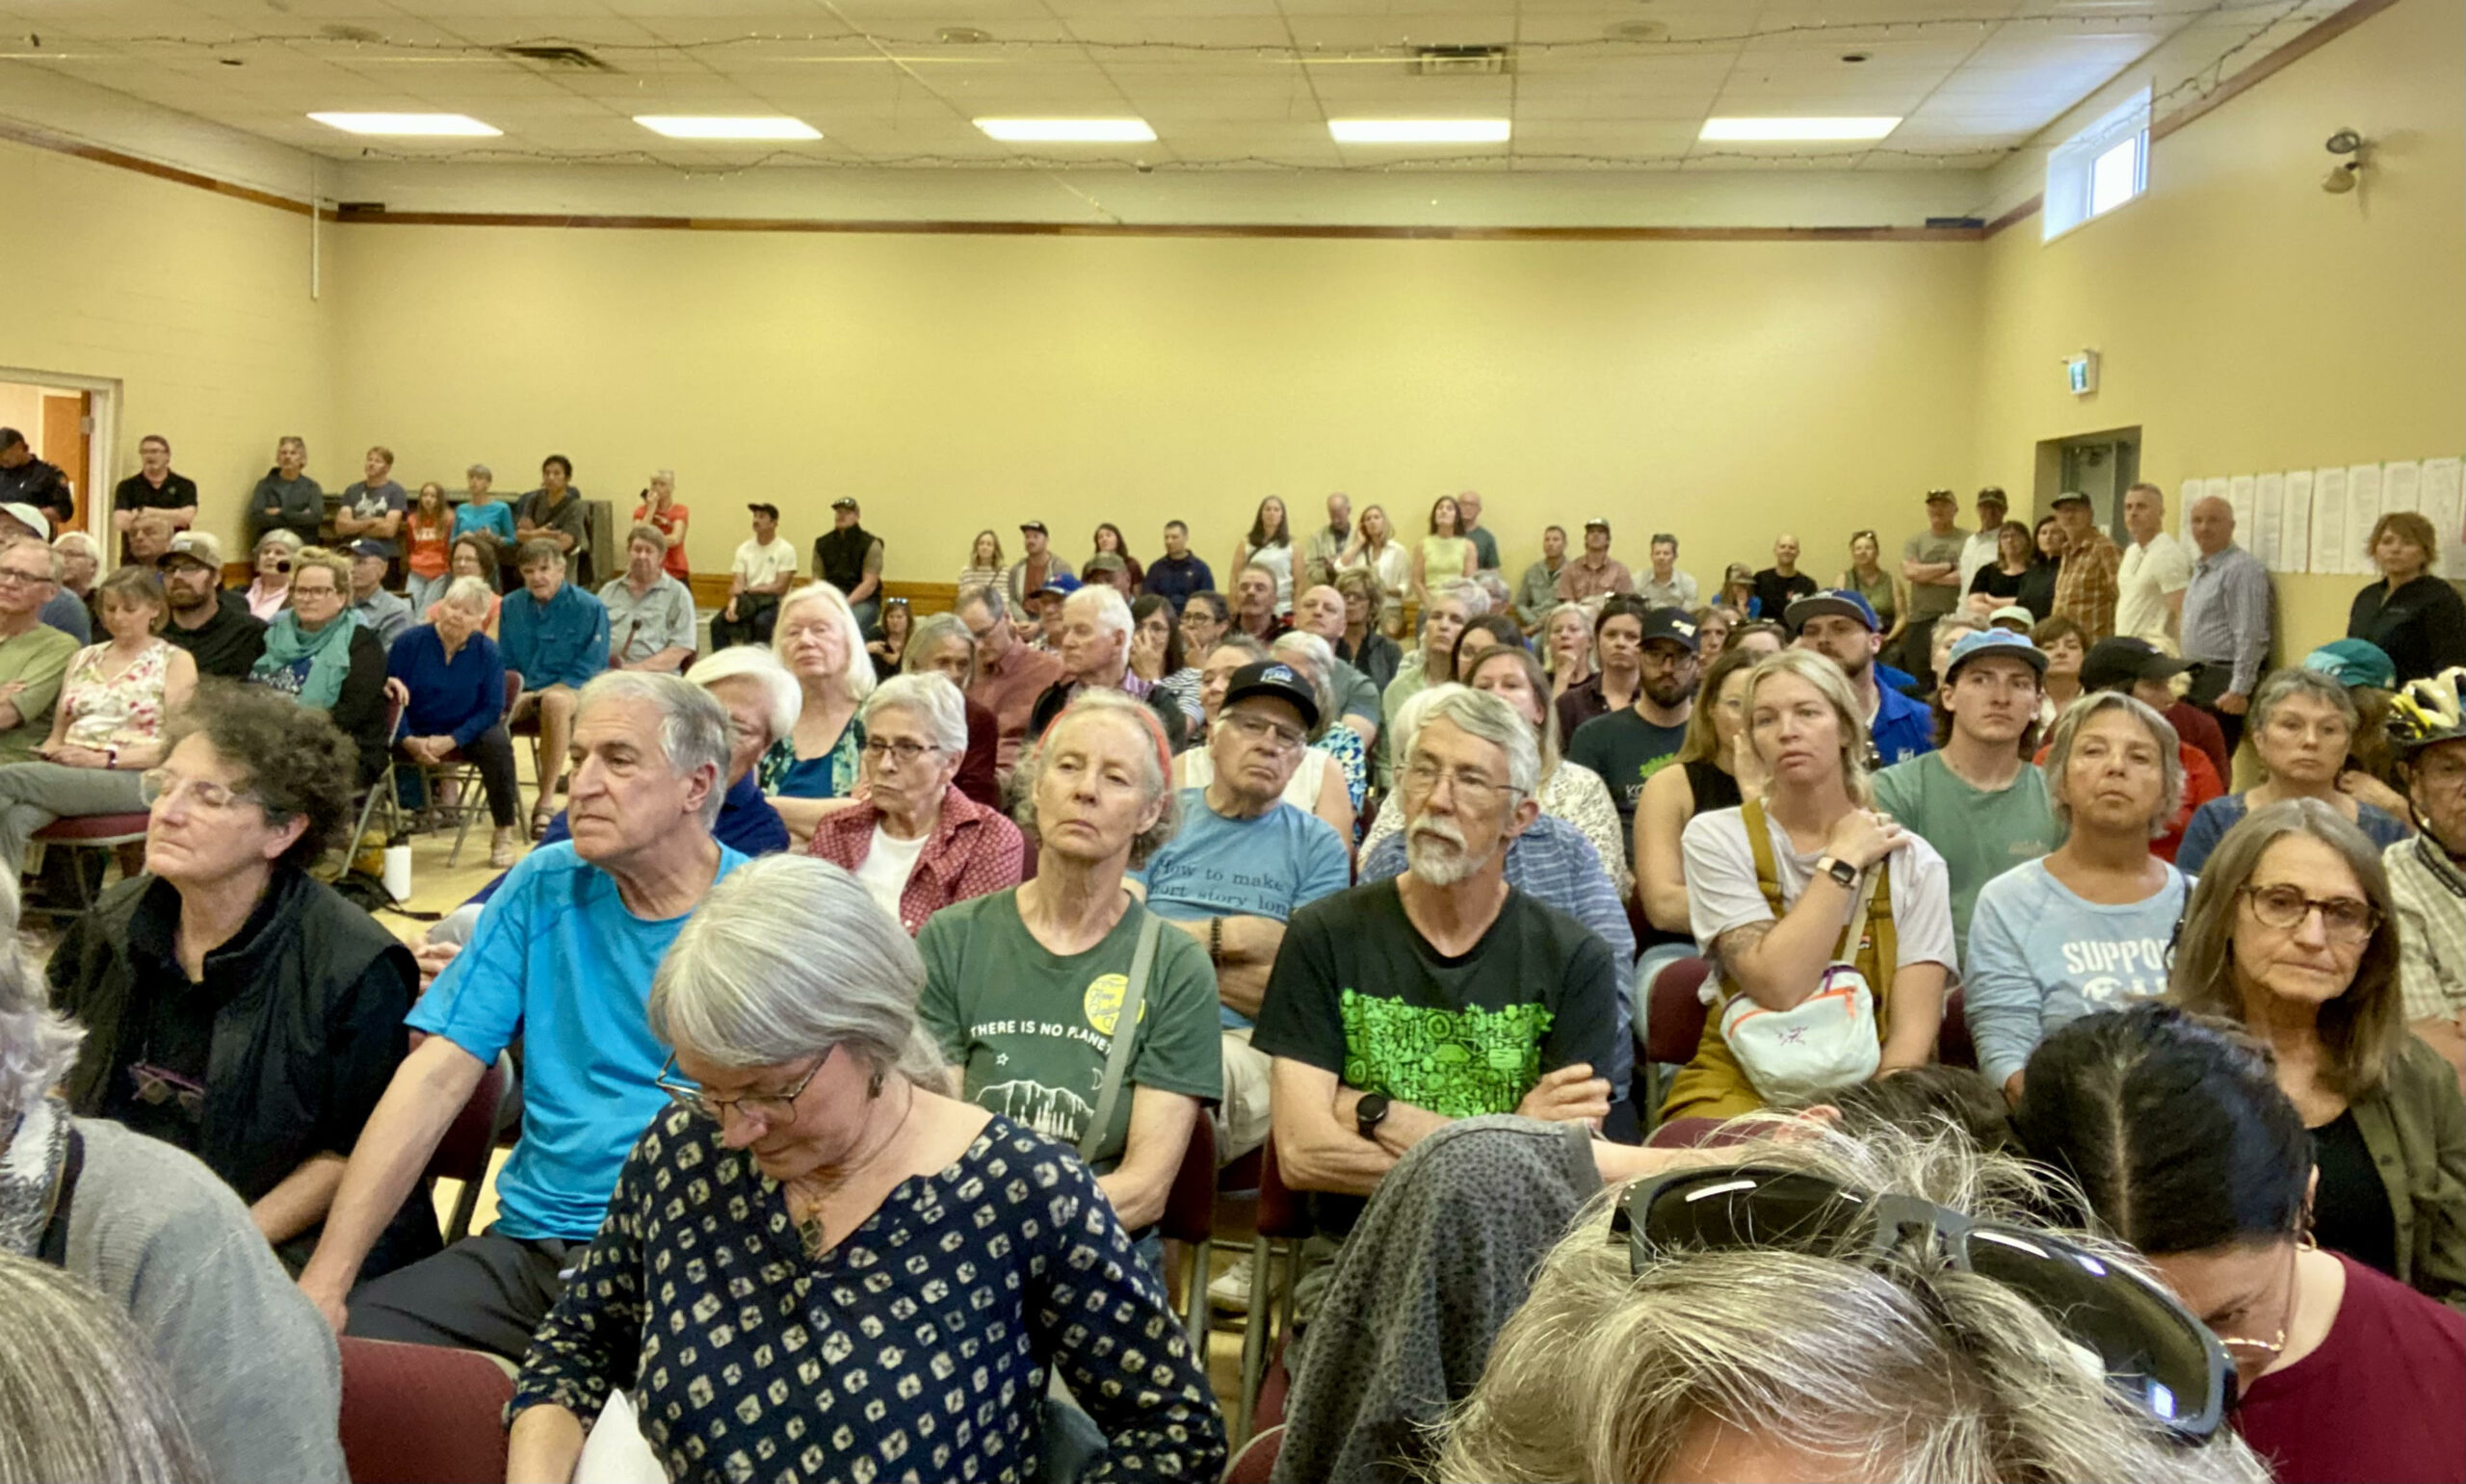 A photo of people at the public hearing